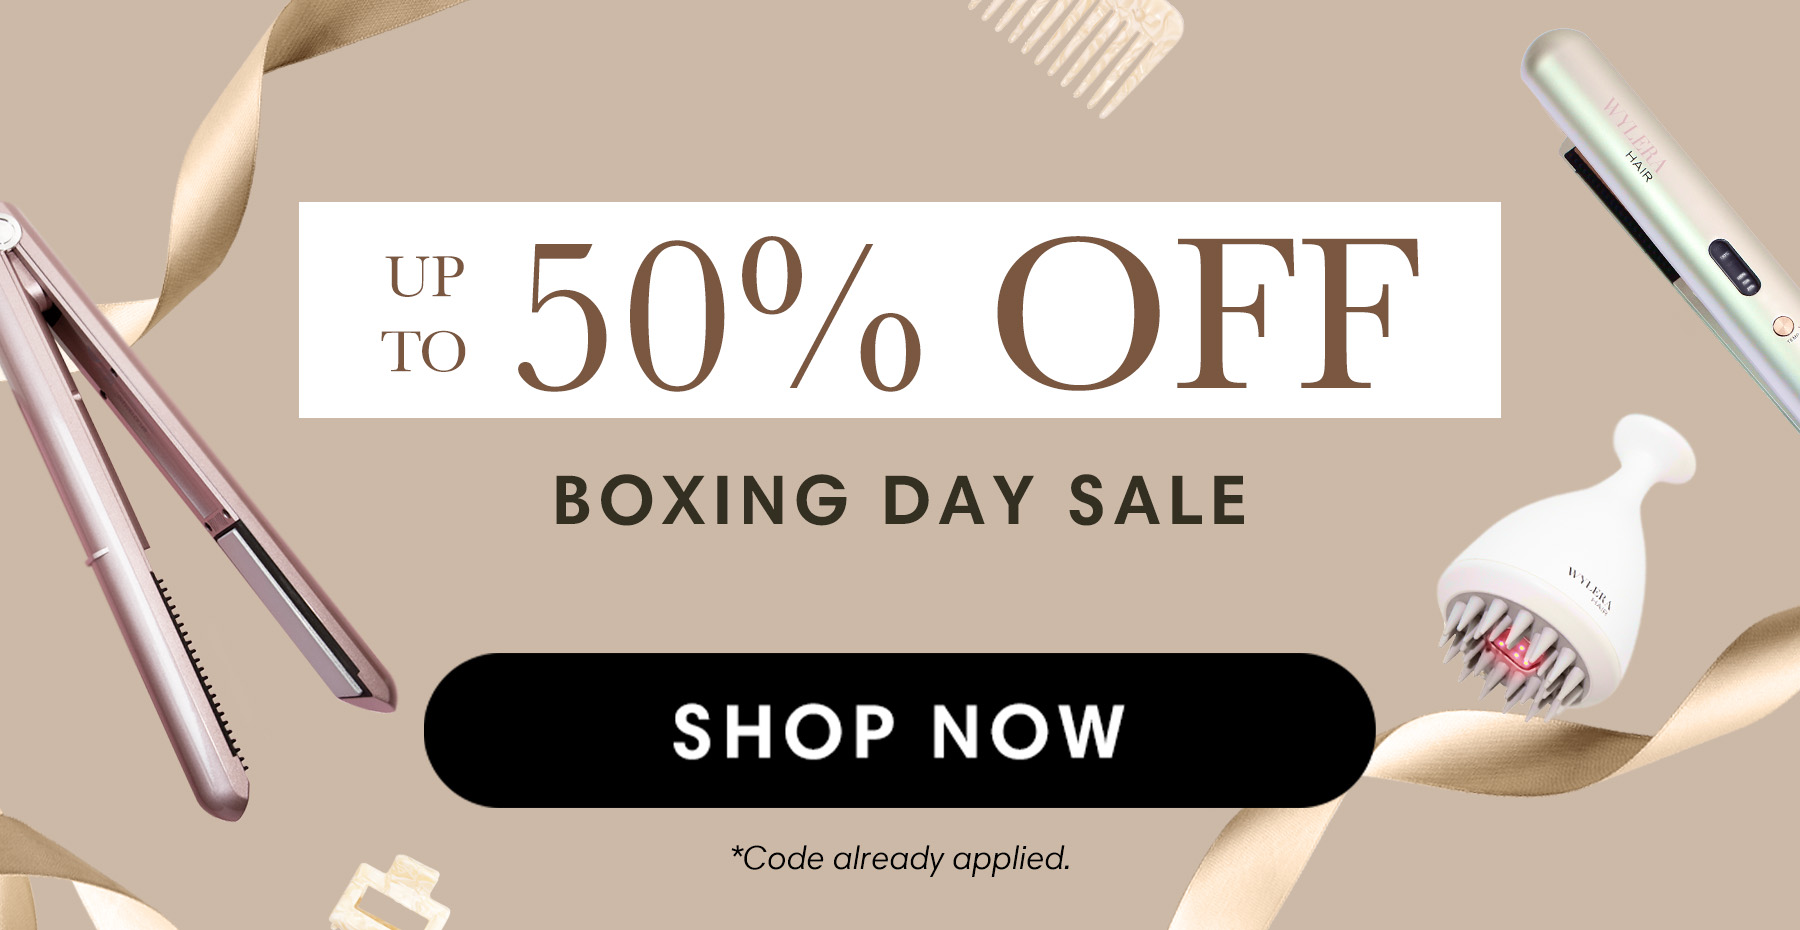  750% OFF 1 BOXING DAY SALE m* *Code already applied. 